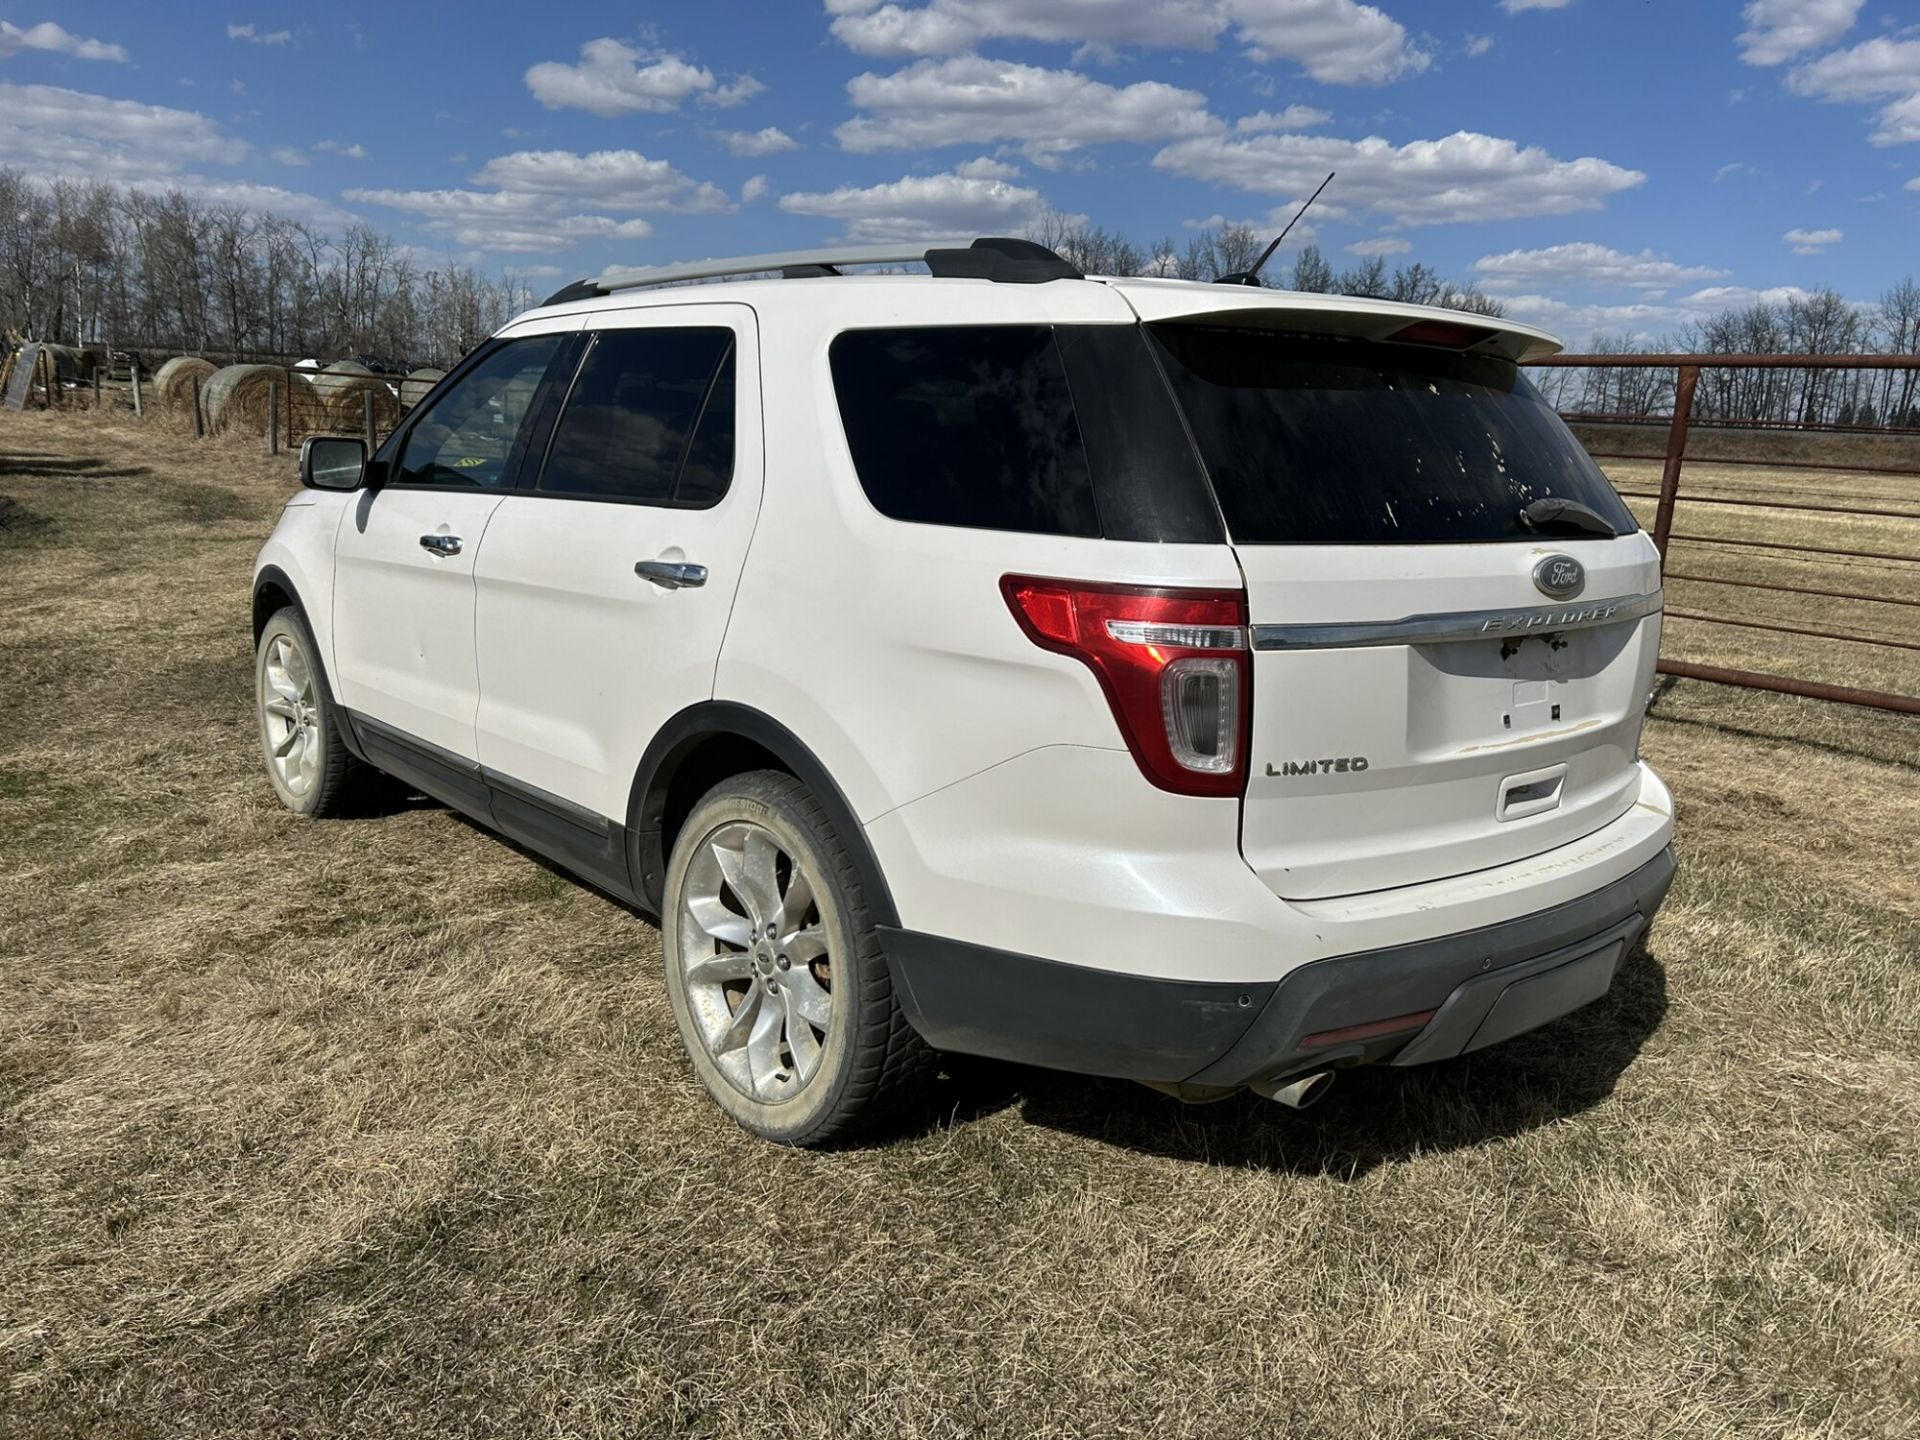 2011 FORD EXPLORER SUV LIMITED, FULL LOAD, AWD. 3.5L V6 - NOTE** TRANS NEEDS REPAIR OR REPLACEMENT - Image 4 of 15